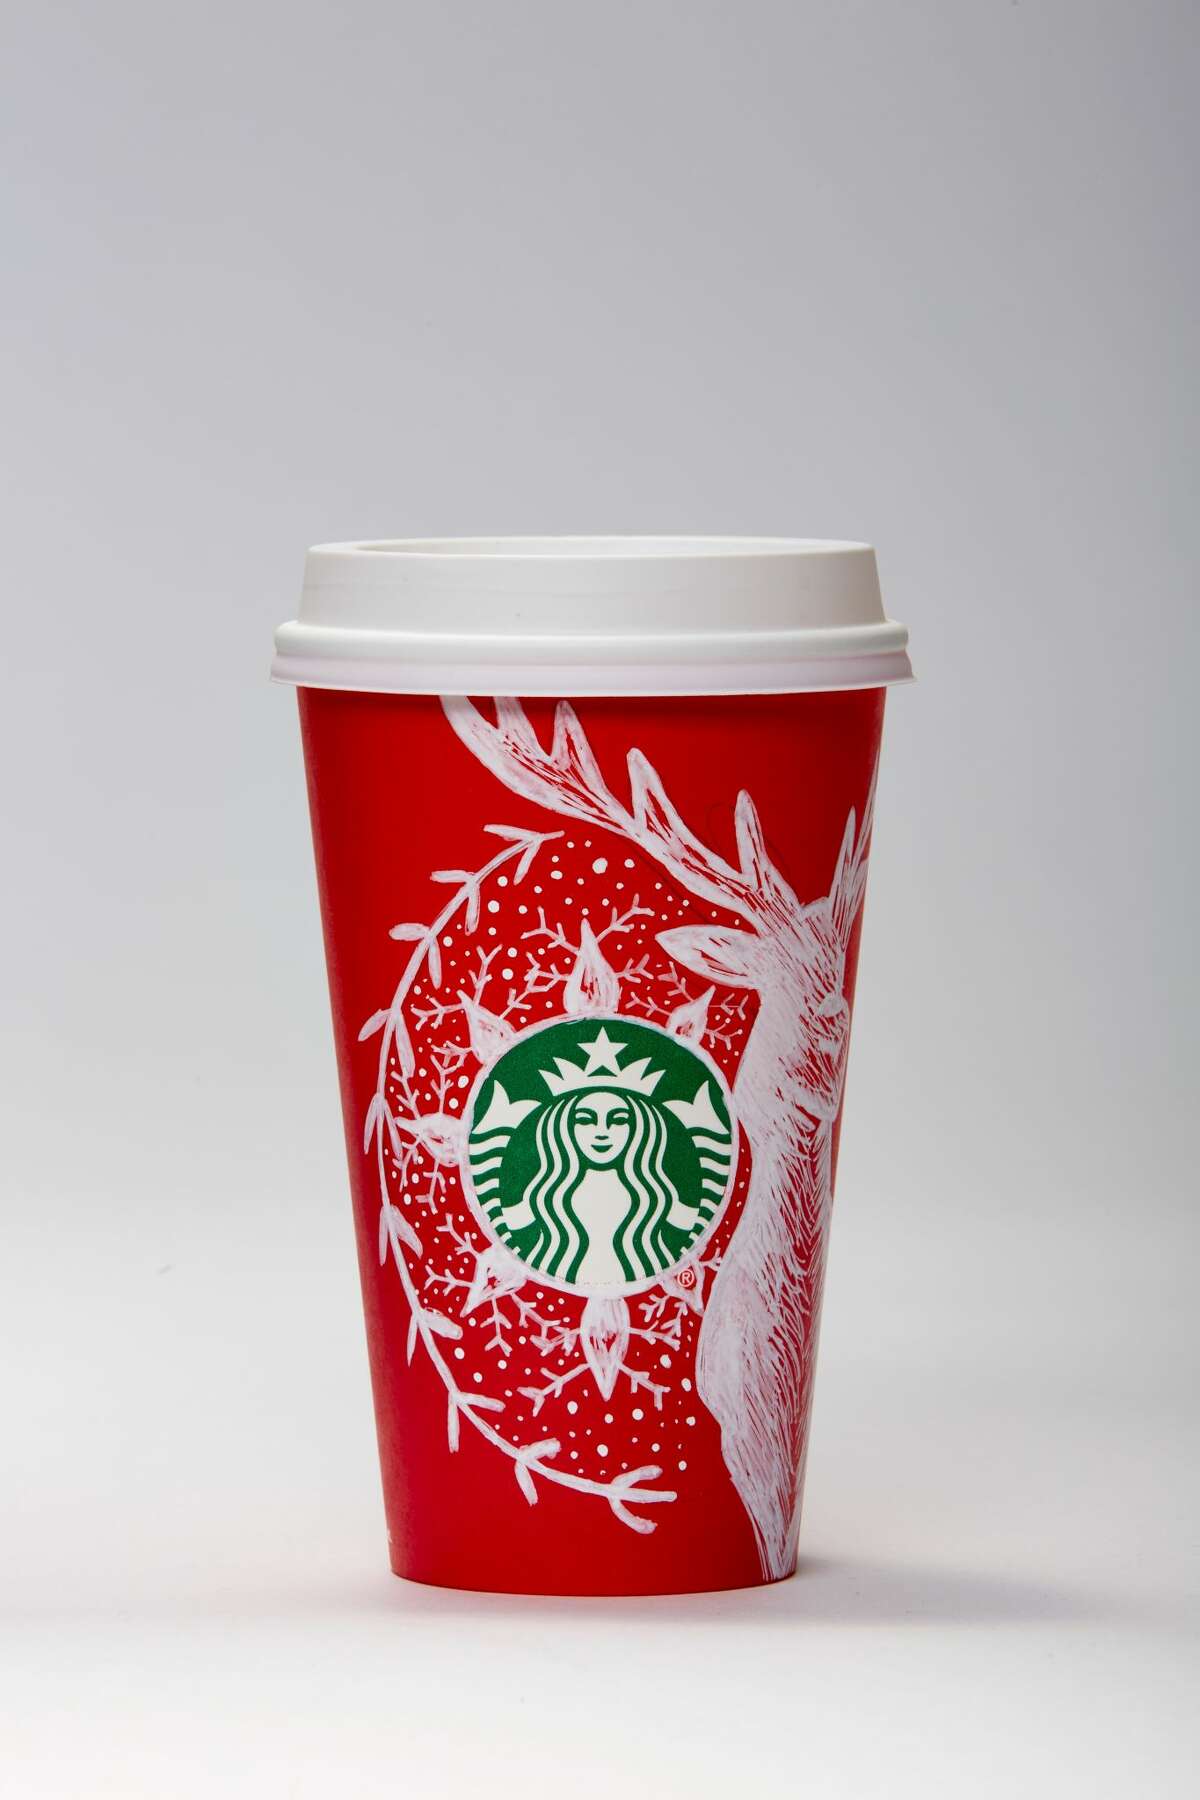 Red cup season starts today! Starbucks rolls out holiday cups